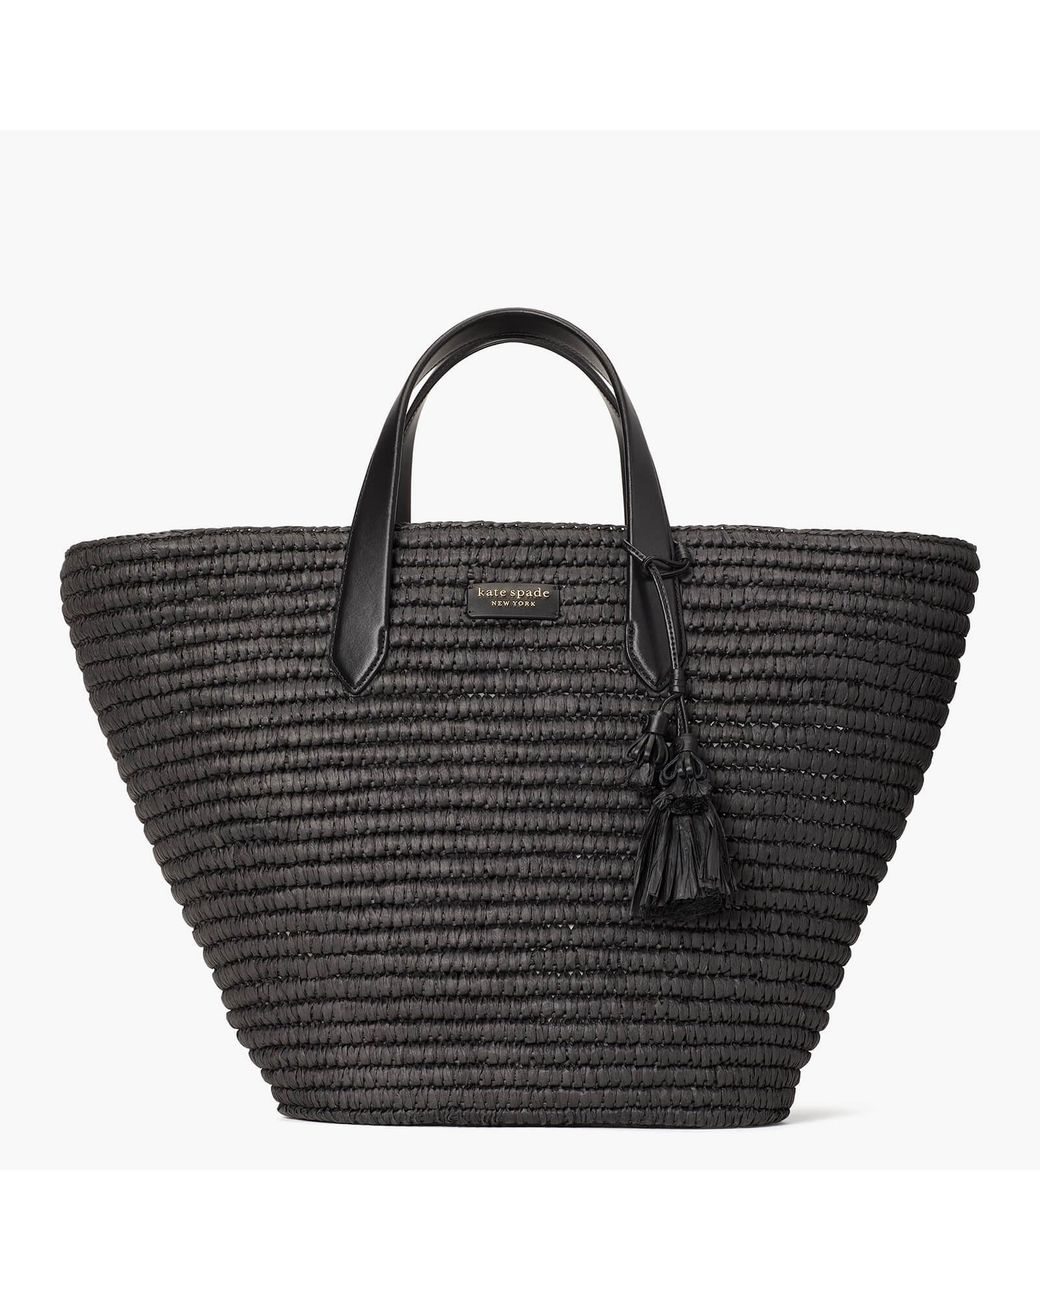 Kate Spade Leather Cabana Large Tote Bag in Black | Lyst